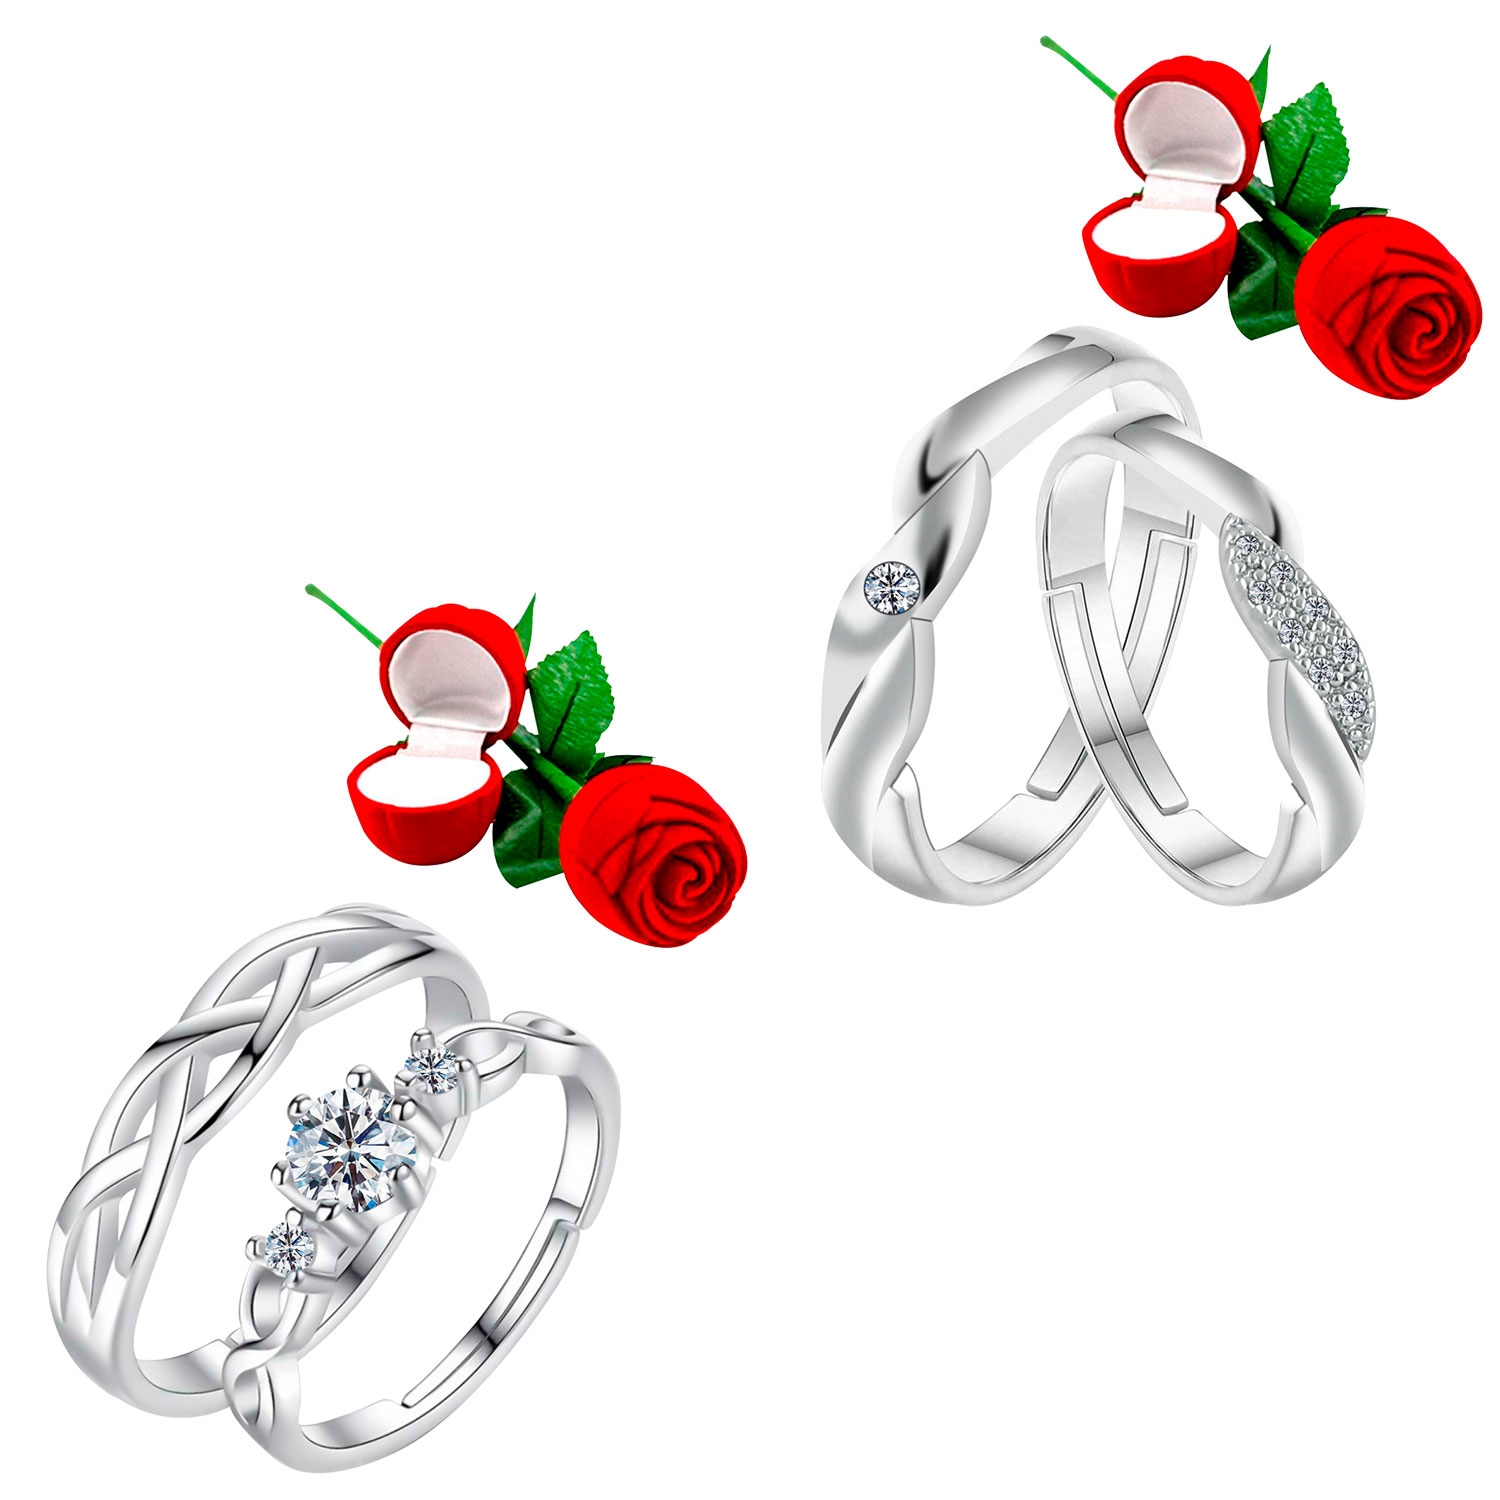 SILVER SHINE |  Adjustable Couple Rings Set for lovers with 2 Piece Red Rose Gift Box Silver Plated Stylish Fancy Ring for Men and Women 